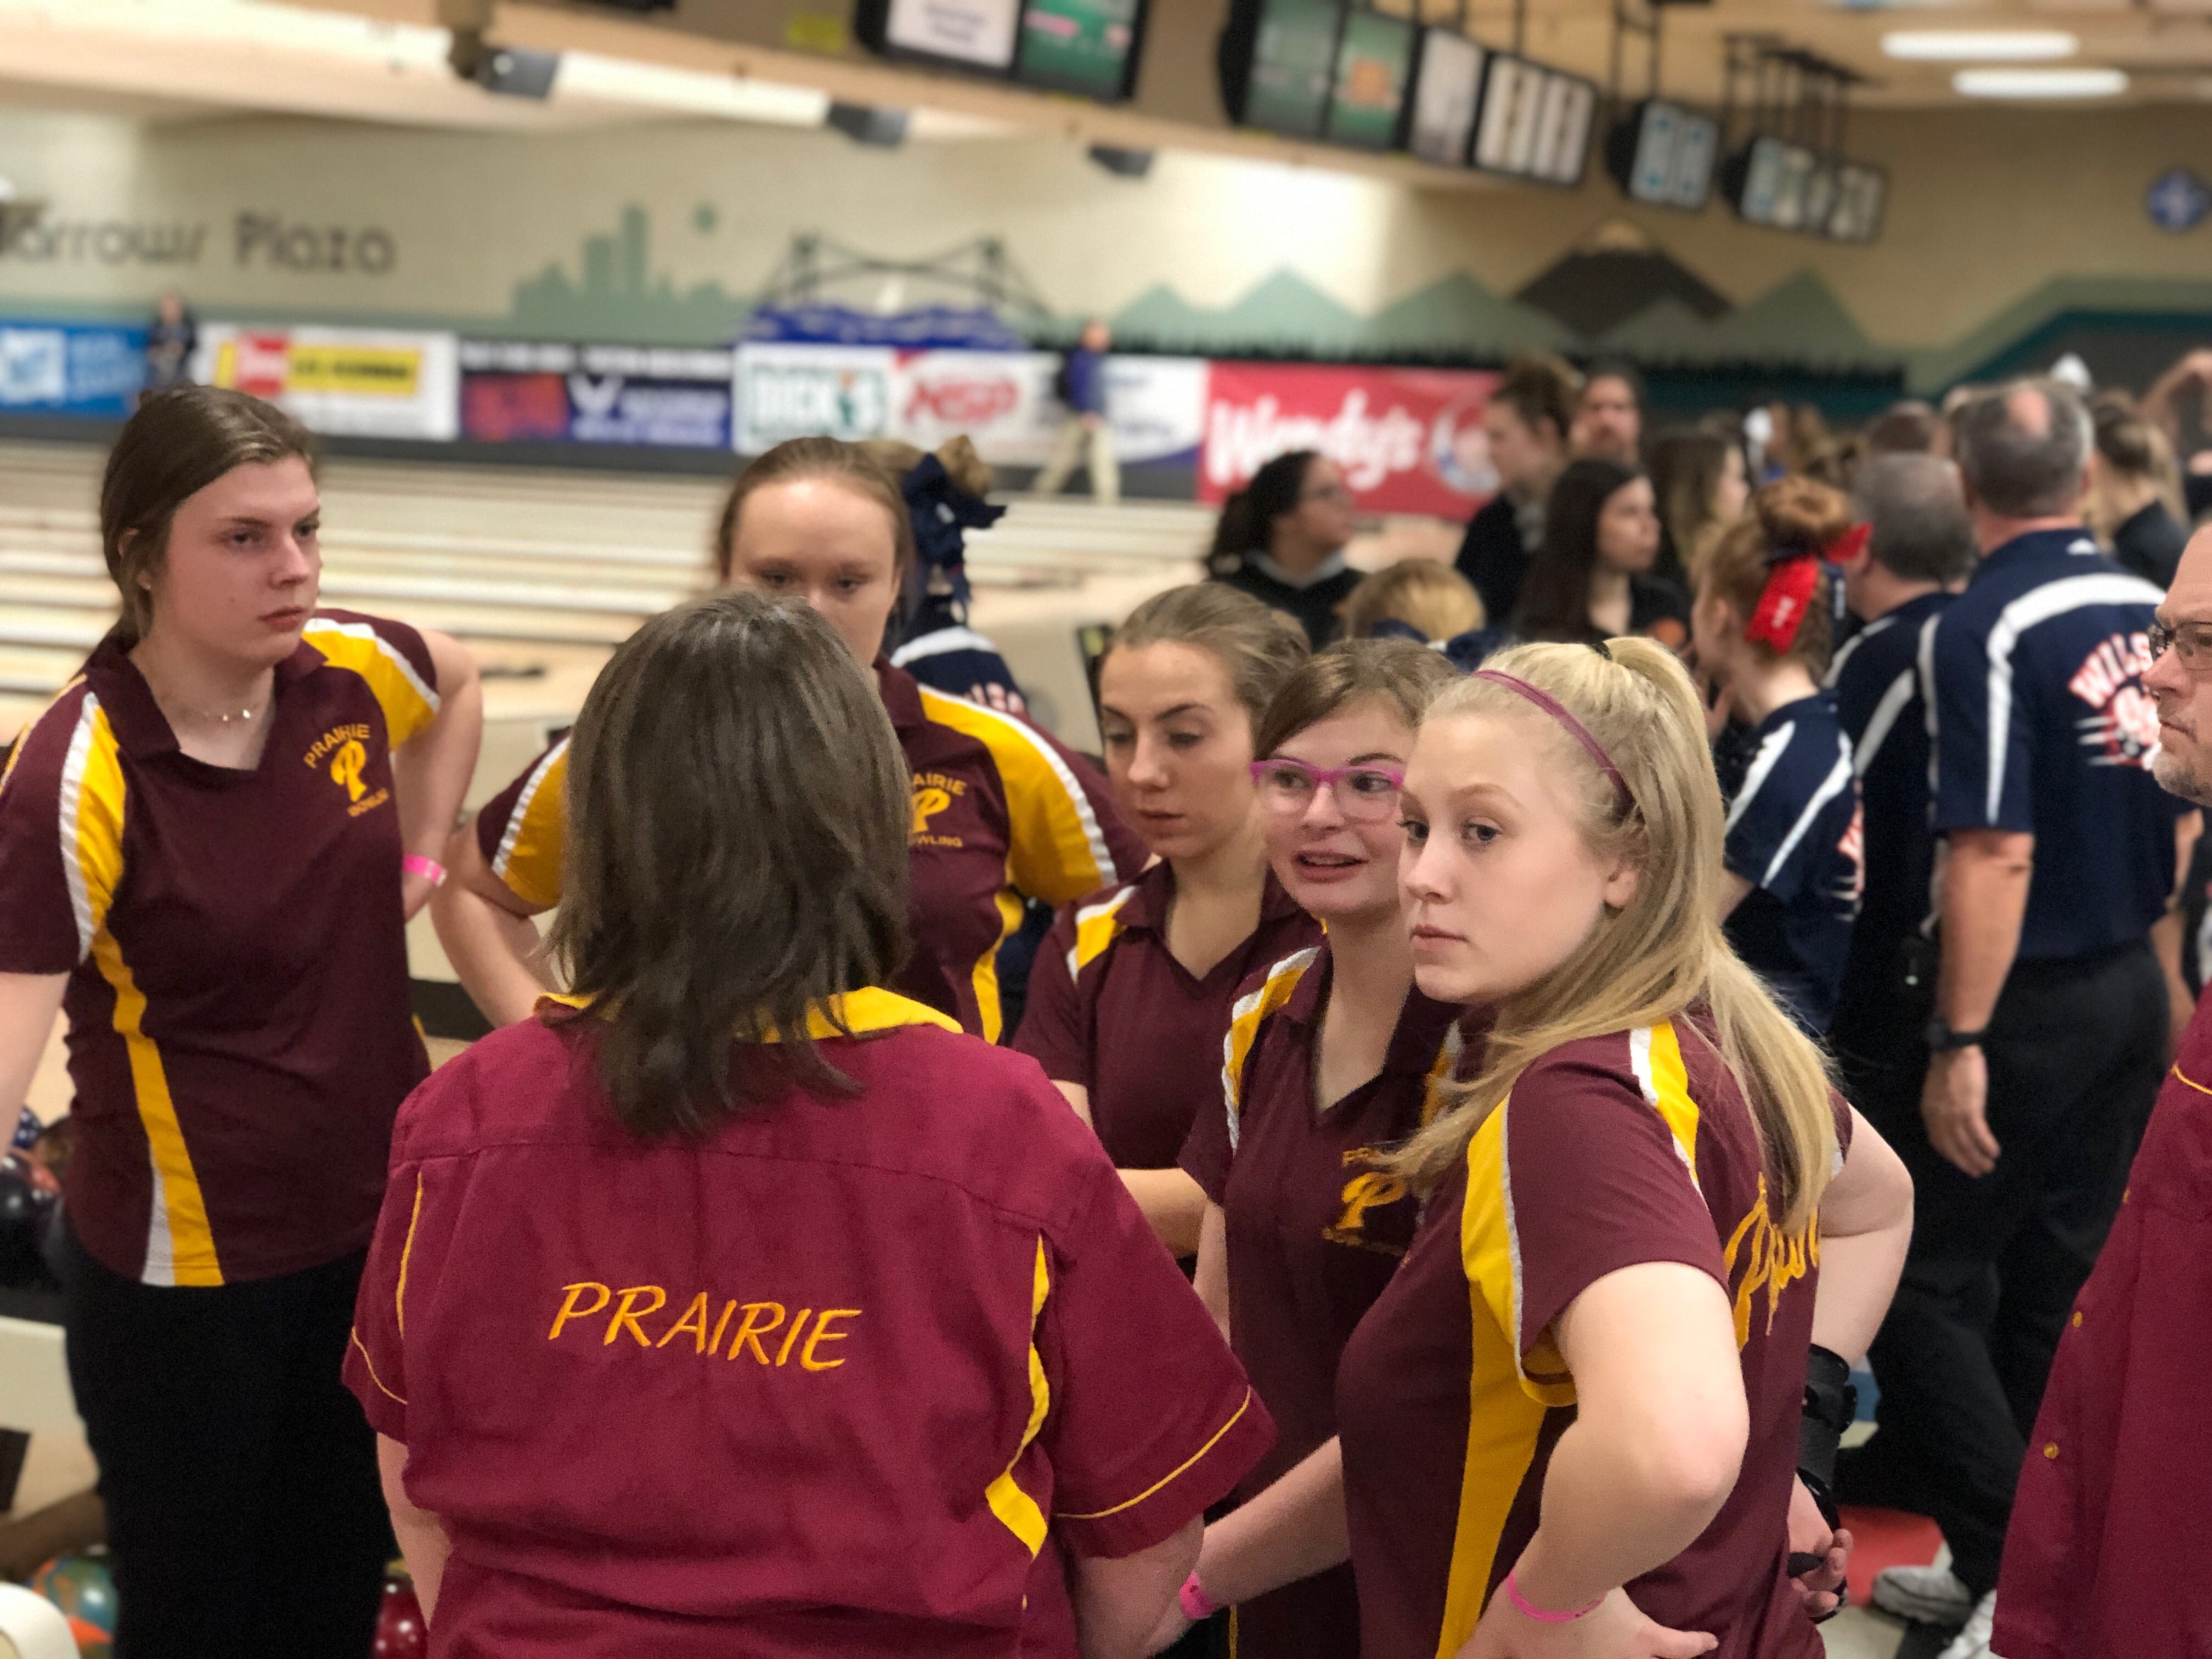 The Prairie girls bowling team gathers before the 3A state bowling team award ceremony, in which it placed second, on Friday at Narrows Plaza in University Place.